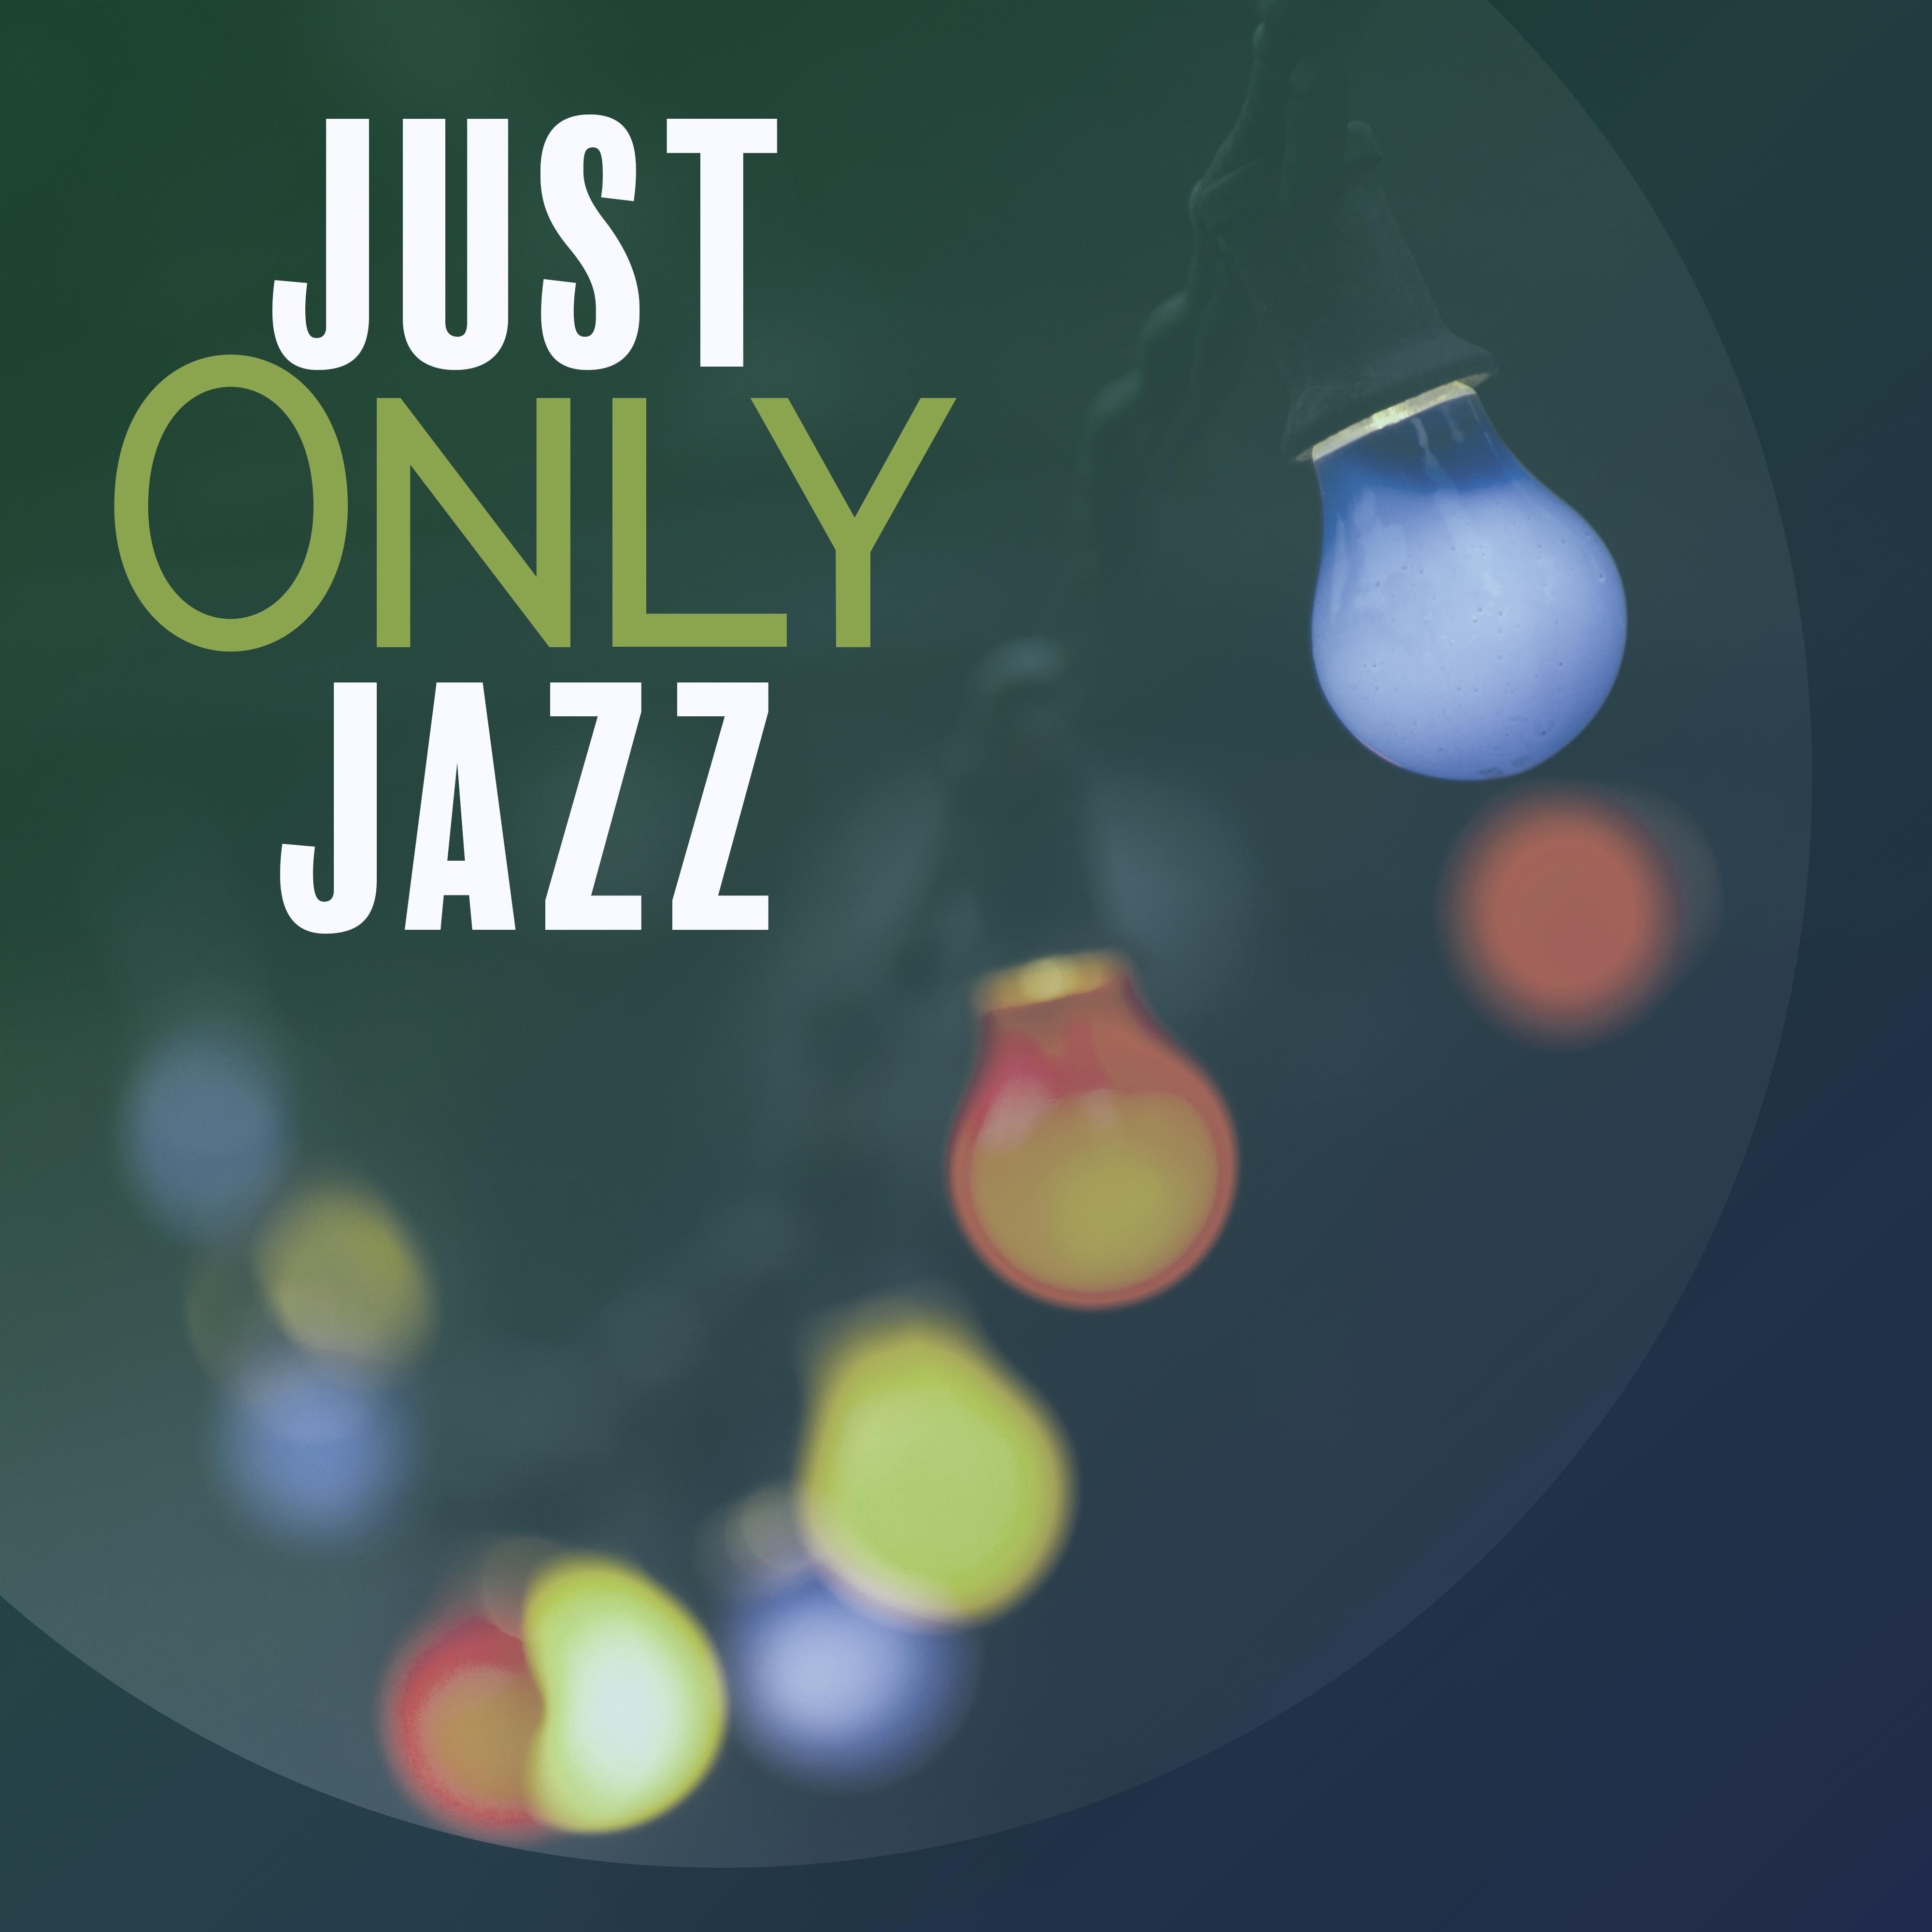 Just Only Jazz – Soothing Jazz Instrumental, Pure Piano Songs, Jazz Lounge